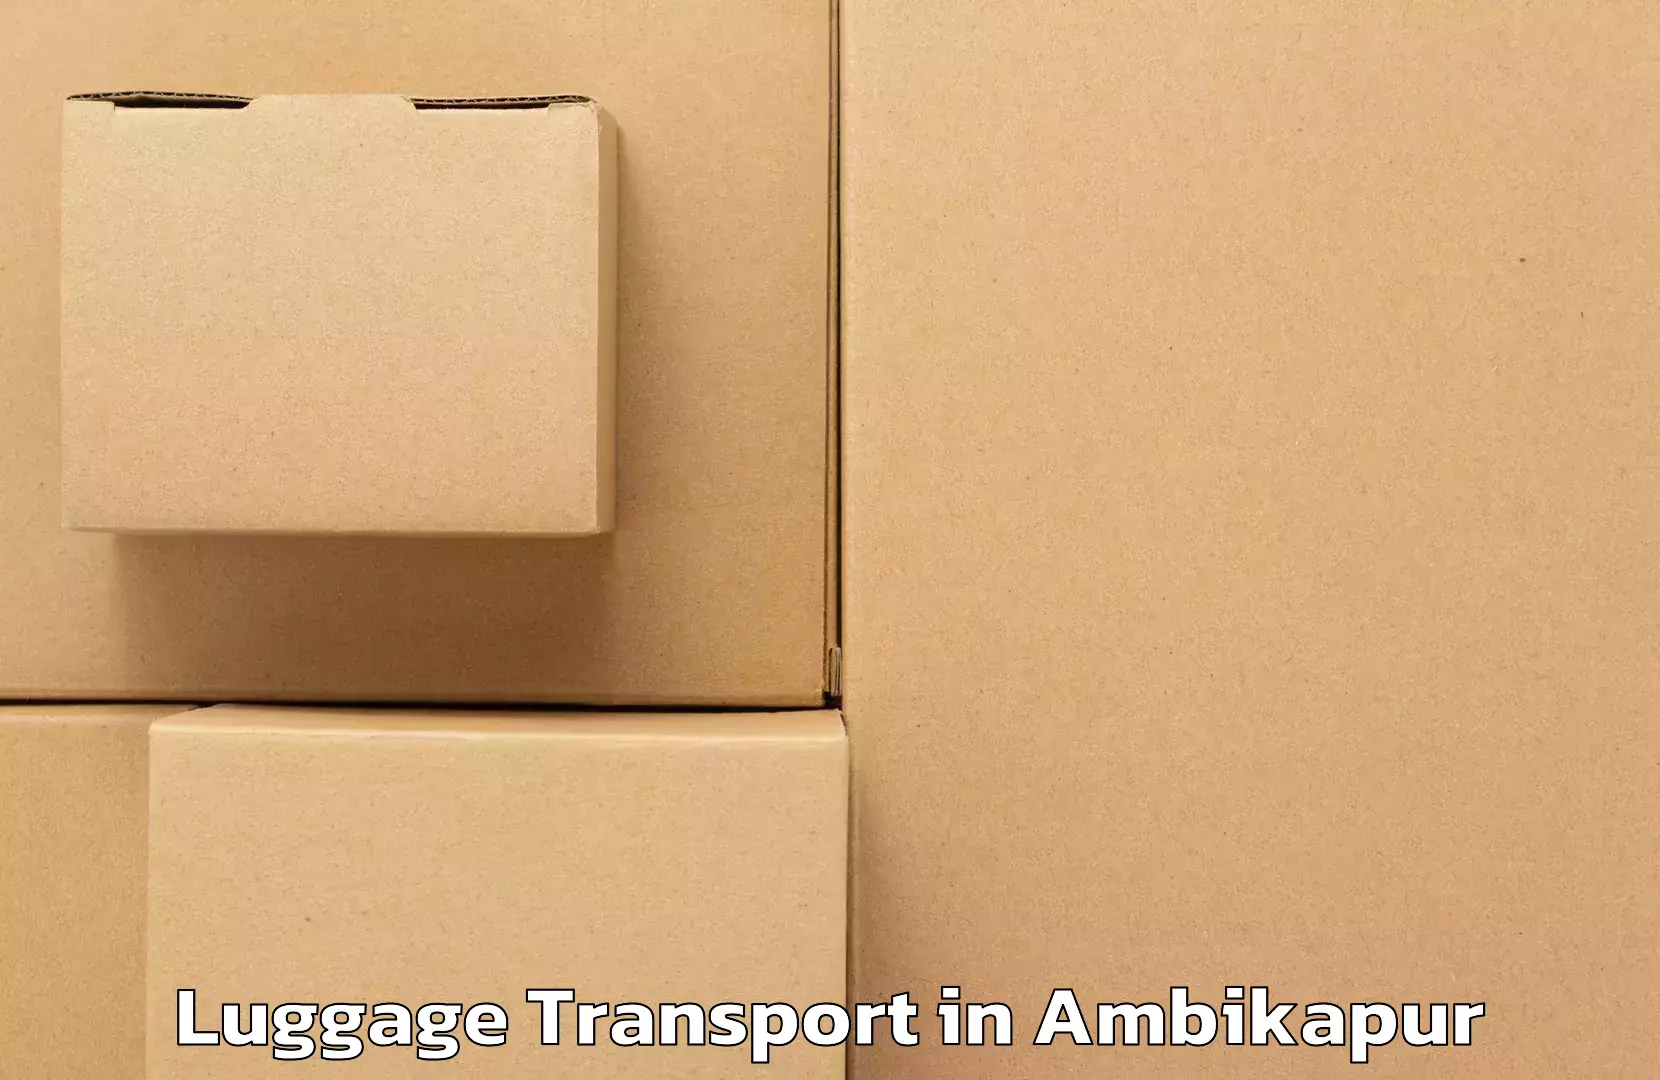 Luggage shipping consultation in Ambikapur